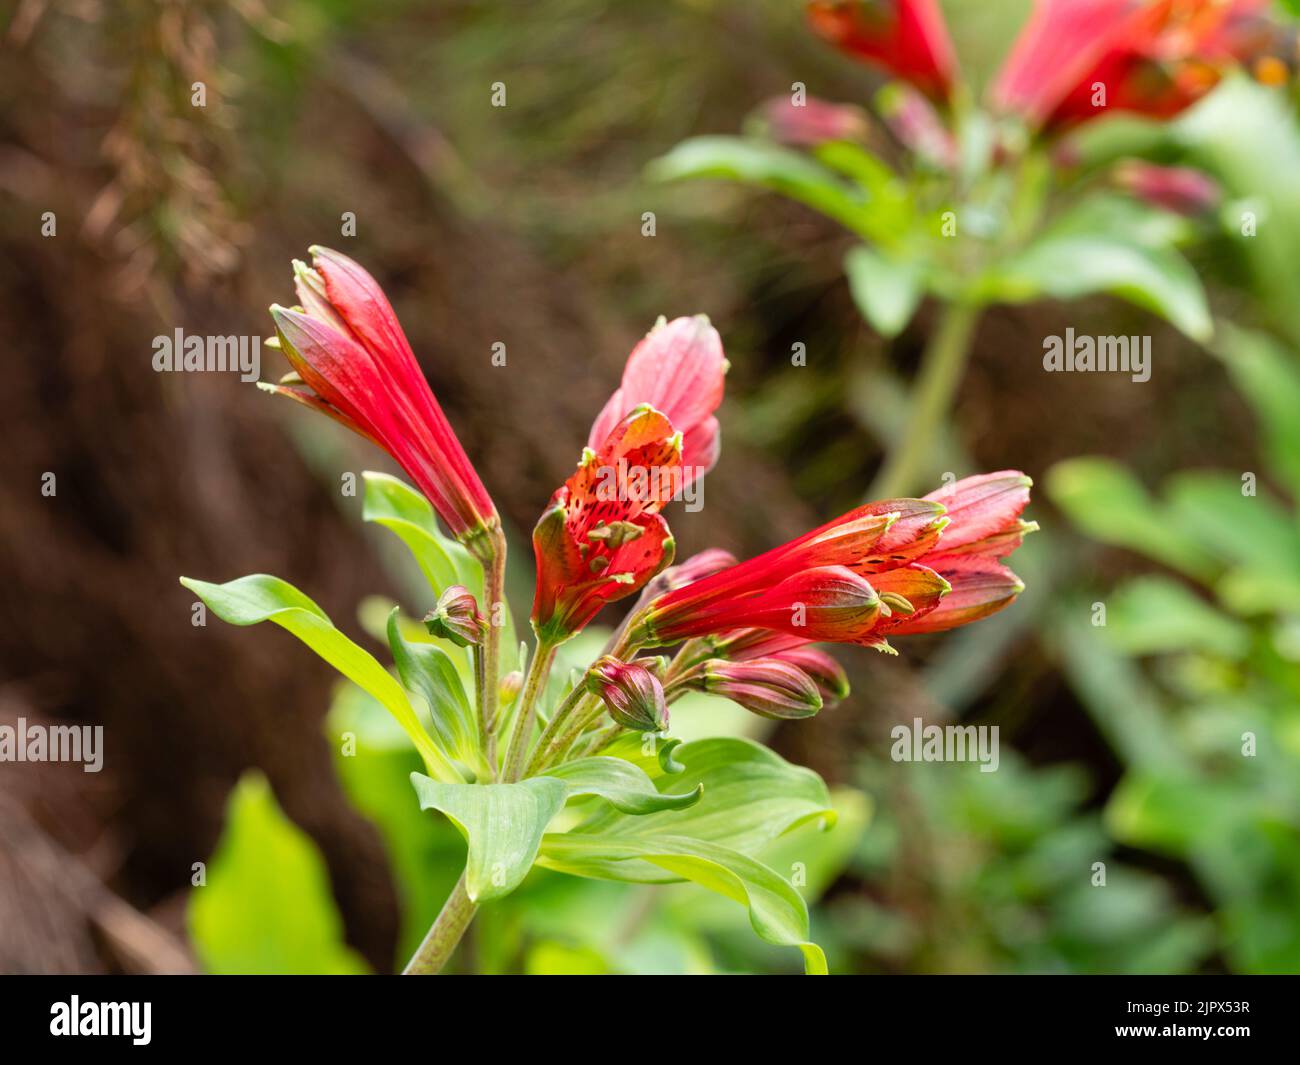 Green tipped red tubular flowers of the half-hardy exotic perennial parrot lily, Alstroemeria psittacina Stock Photo